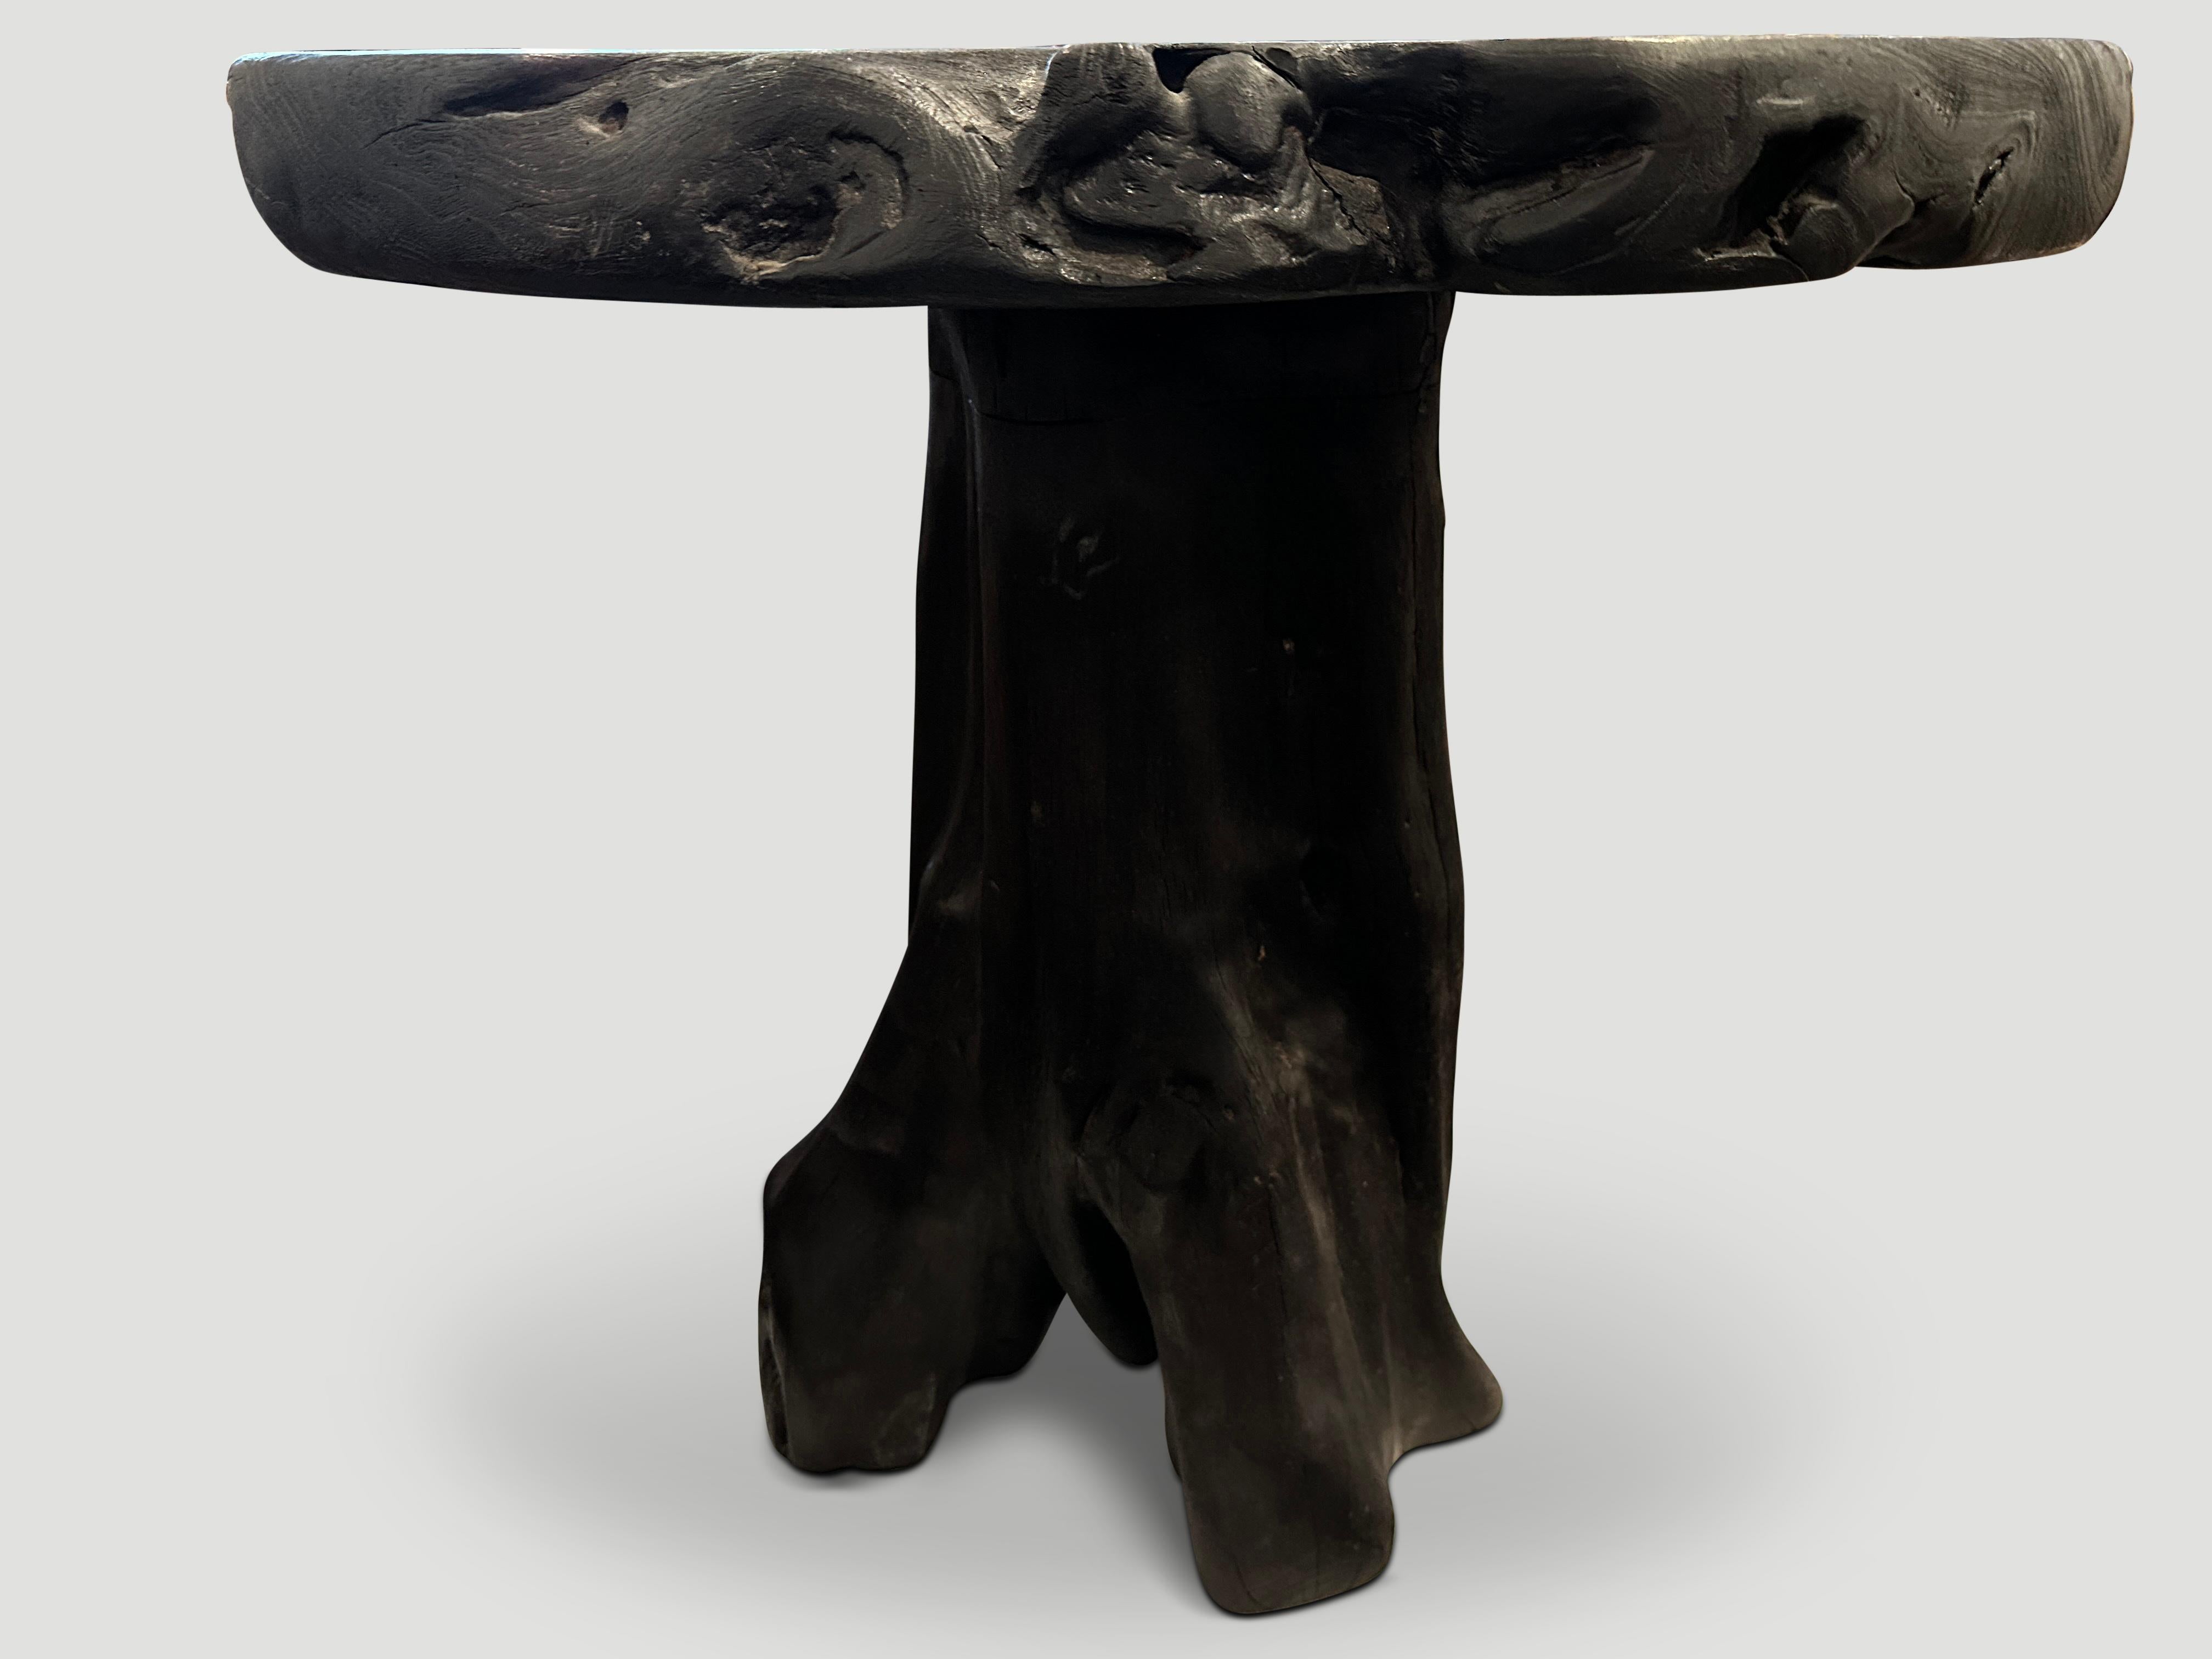 Andrianna Shamaris Sculptural Charred Teak Wood Side Table or Pedestal In Excellent Condition For Sale In New York, NY